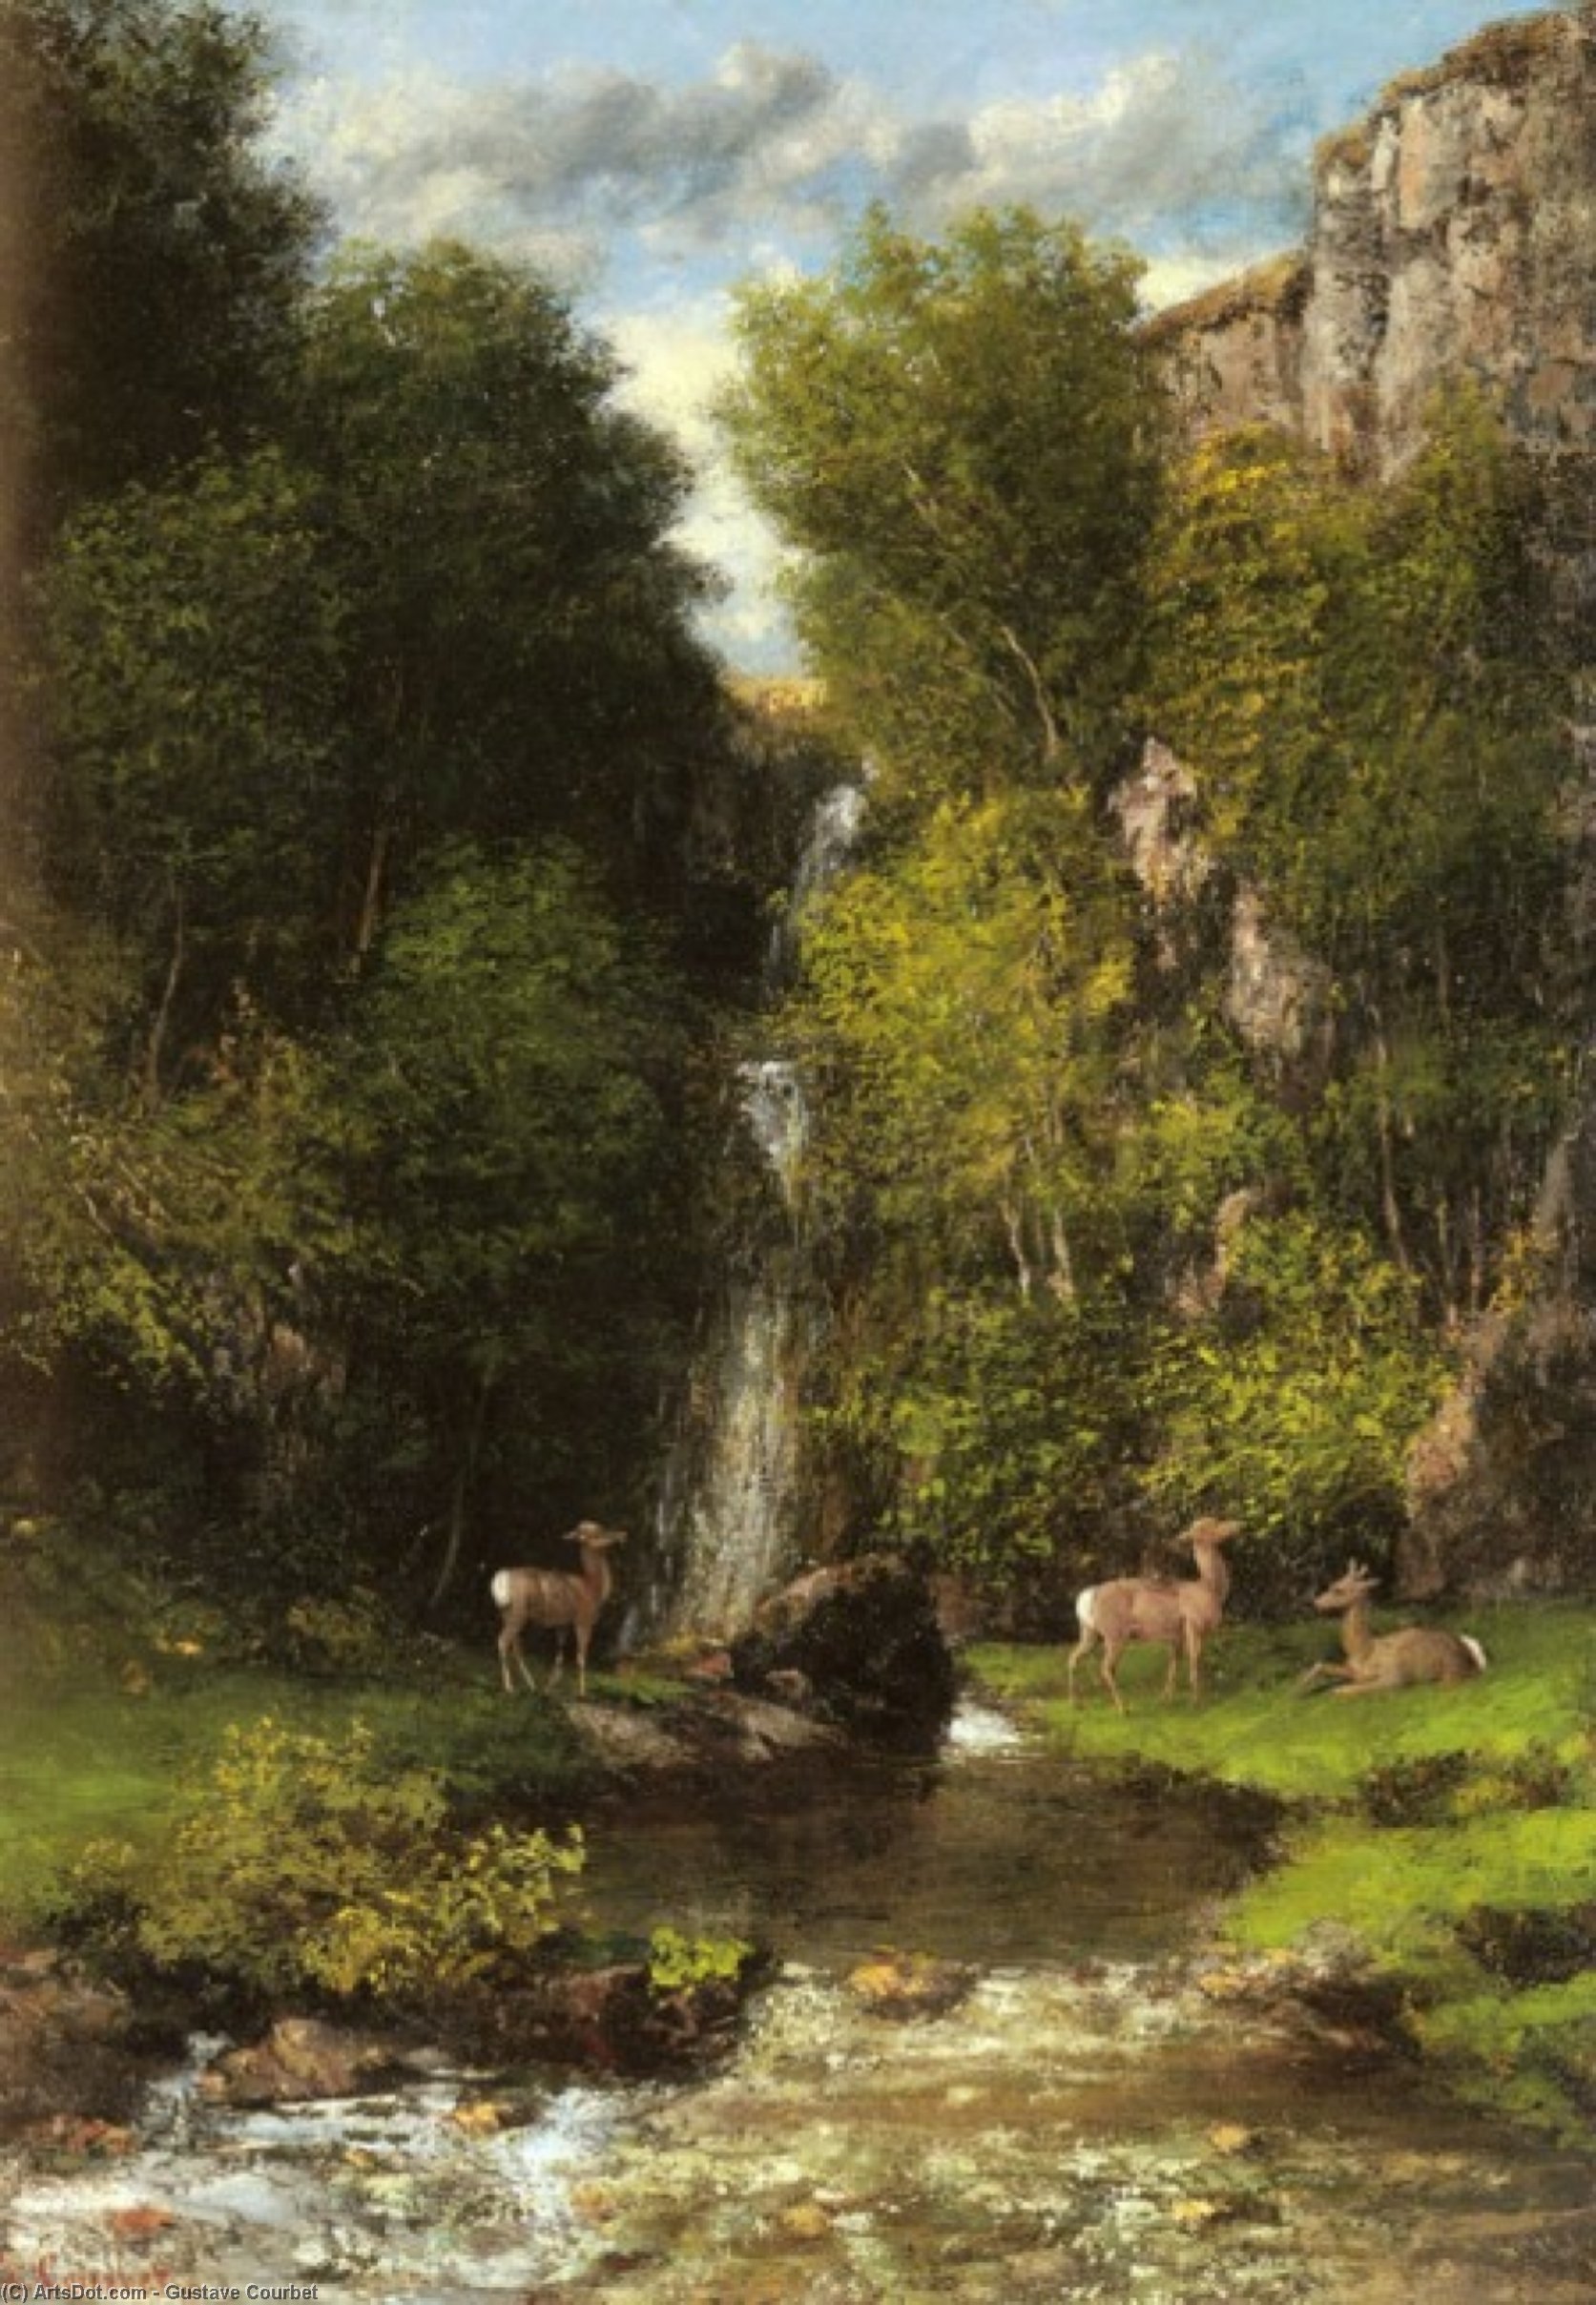 WikiOO.org - Encyclopedia of Fine Arts - Målning, konstverk Gustave Courbet - A Family of Deer in a Landscape with a Waterfall